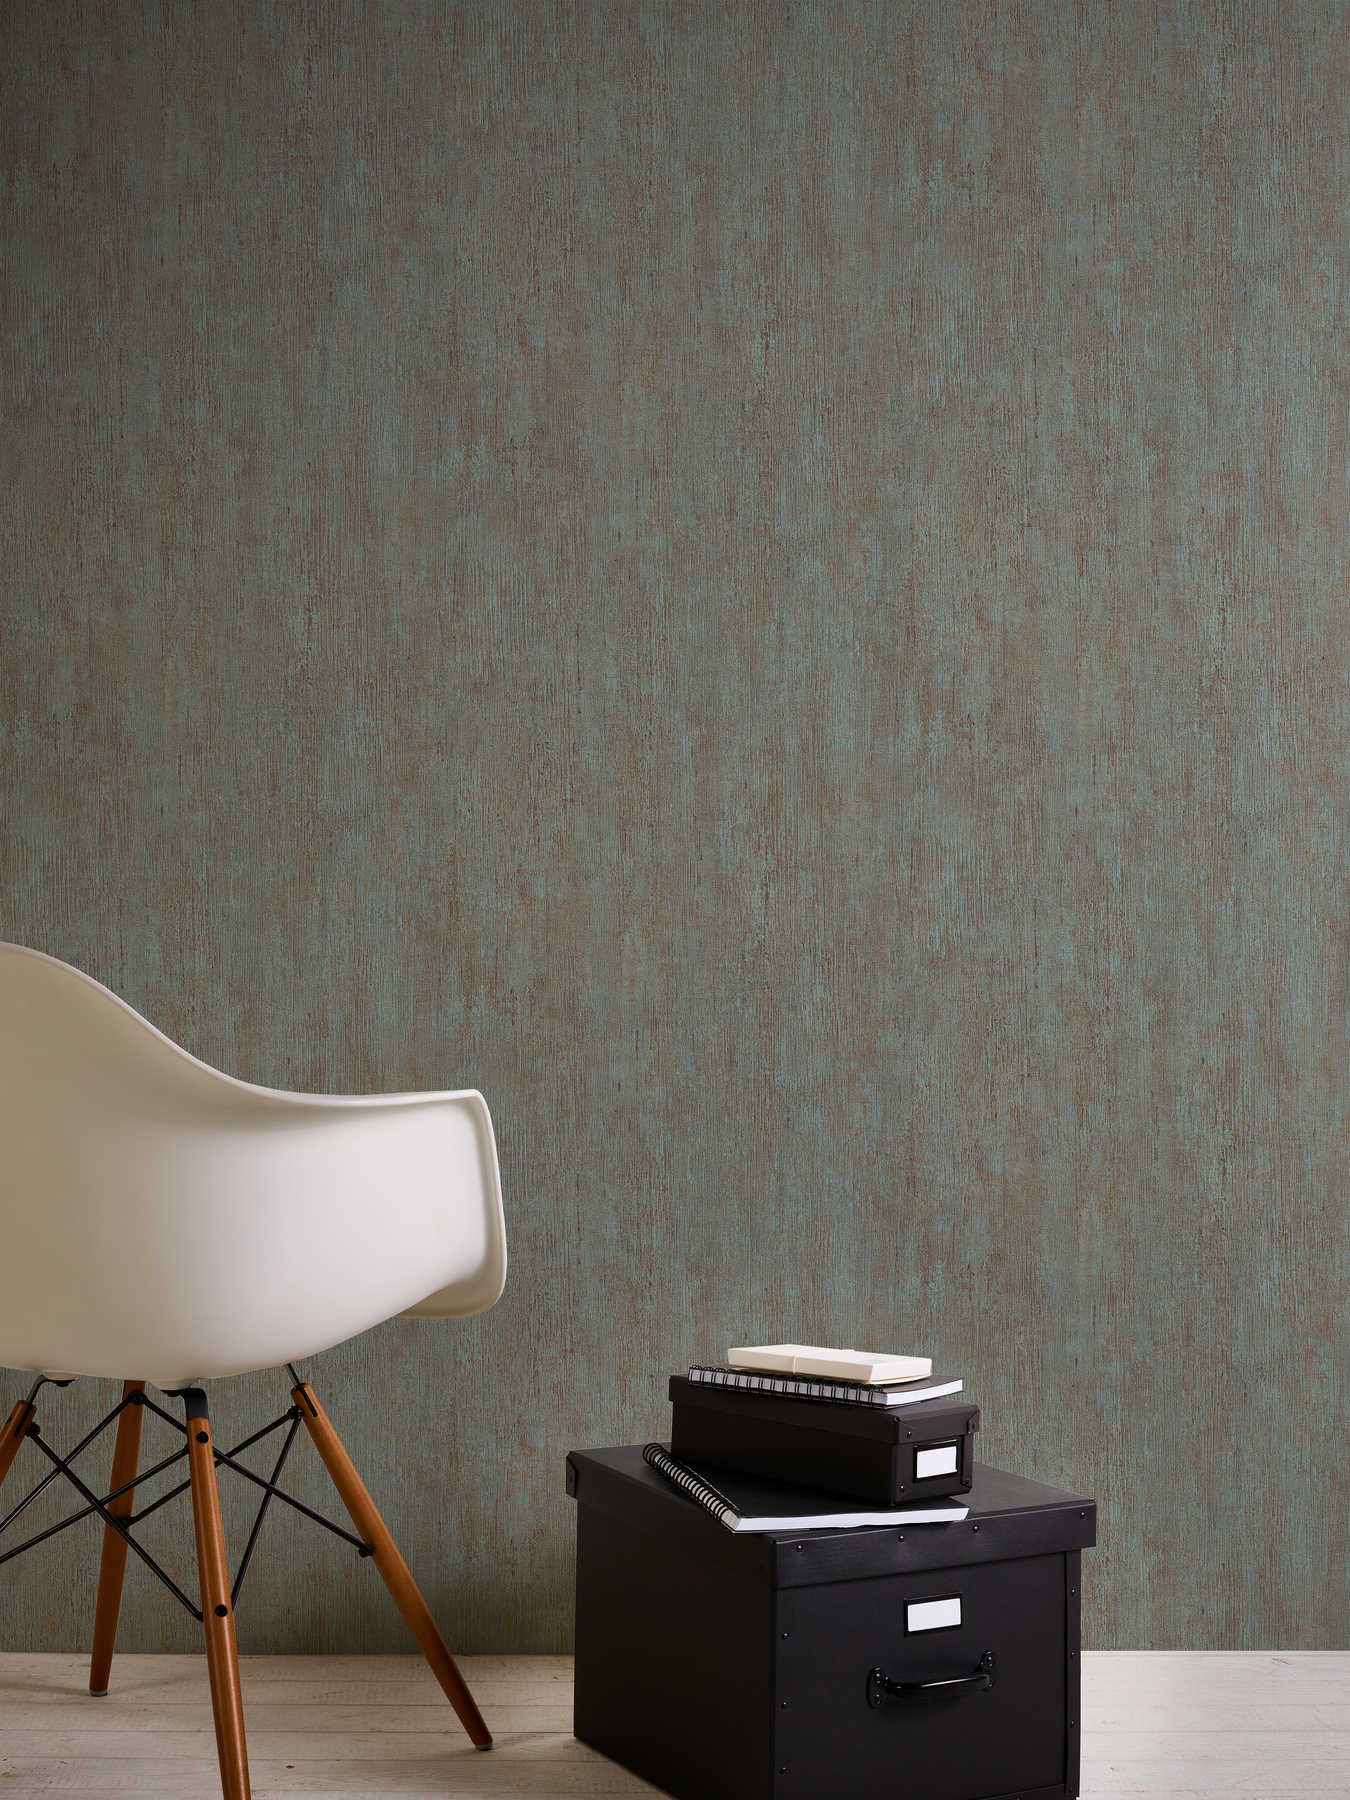             Non-woven wallpaper used look & rust effect - brown, turquoise
        